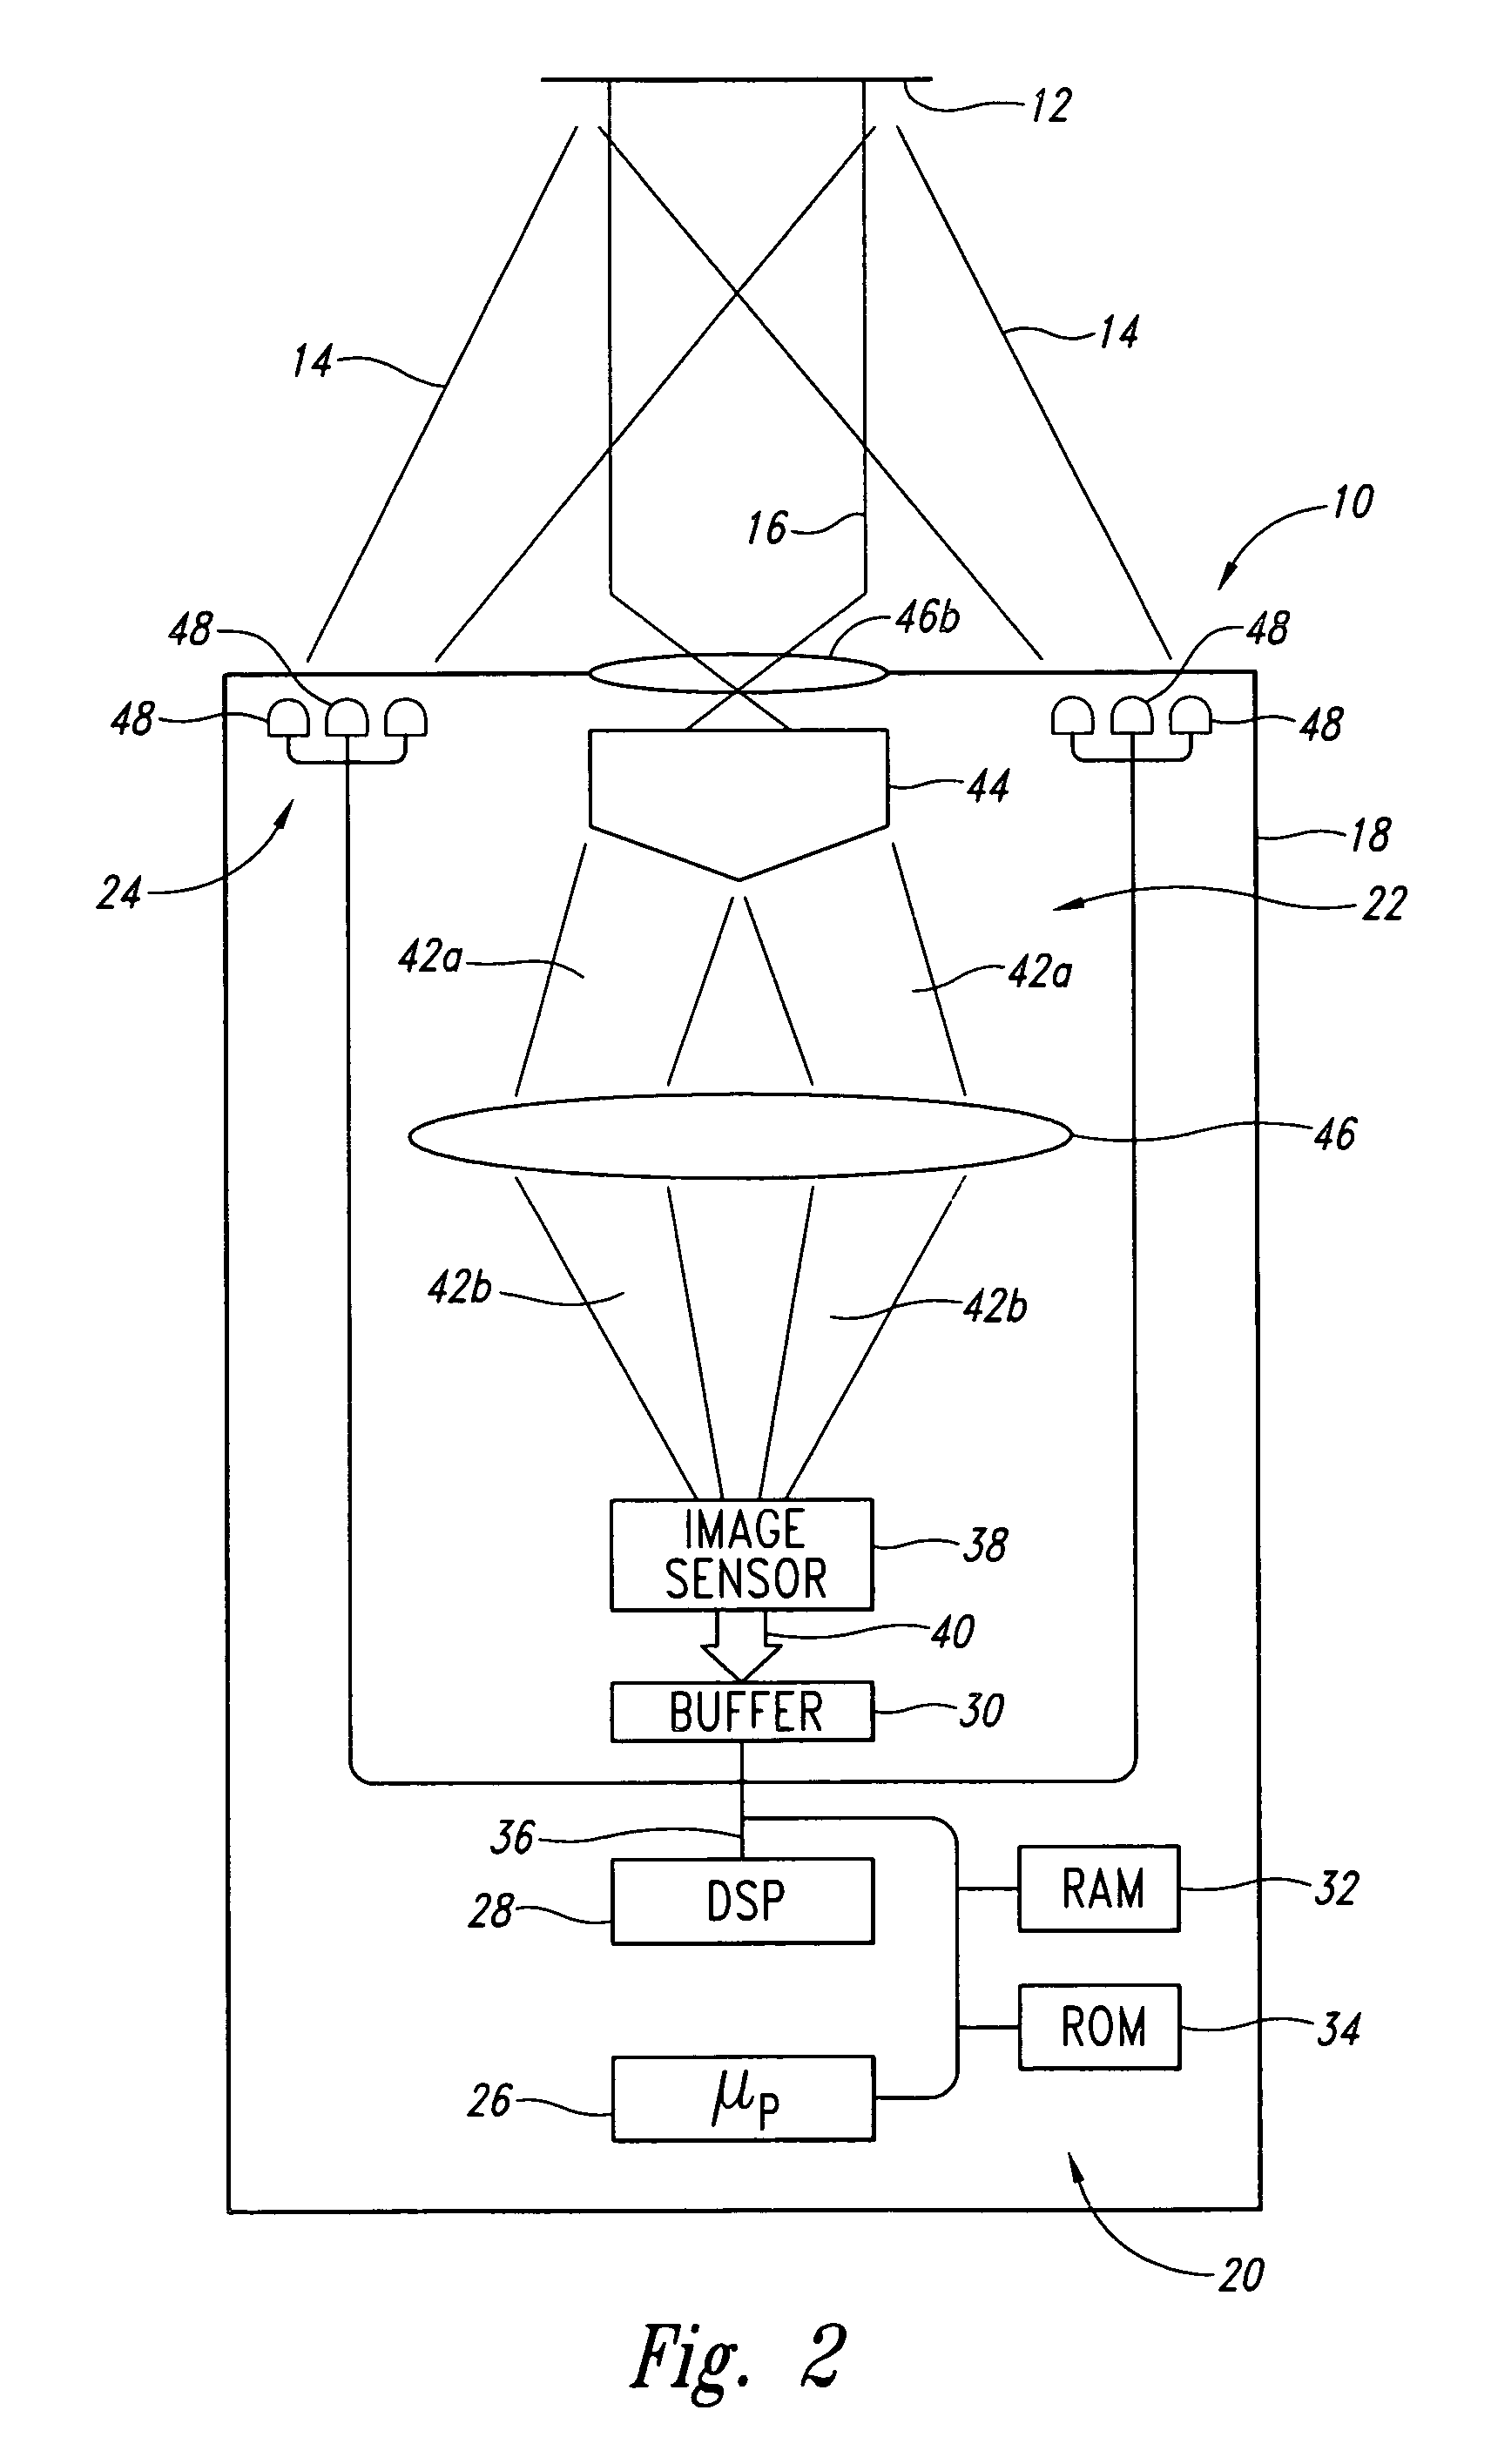 Optoelectronic reader and method for reading machine-readable symbols